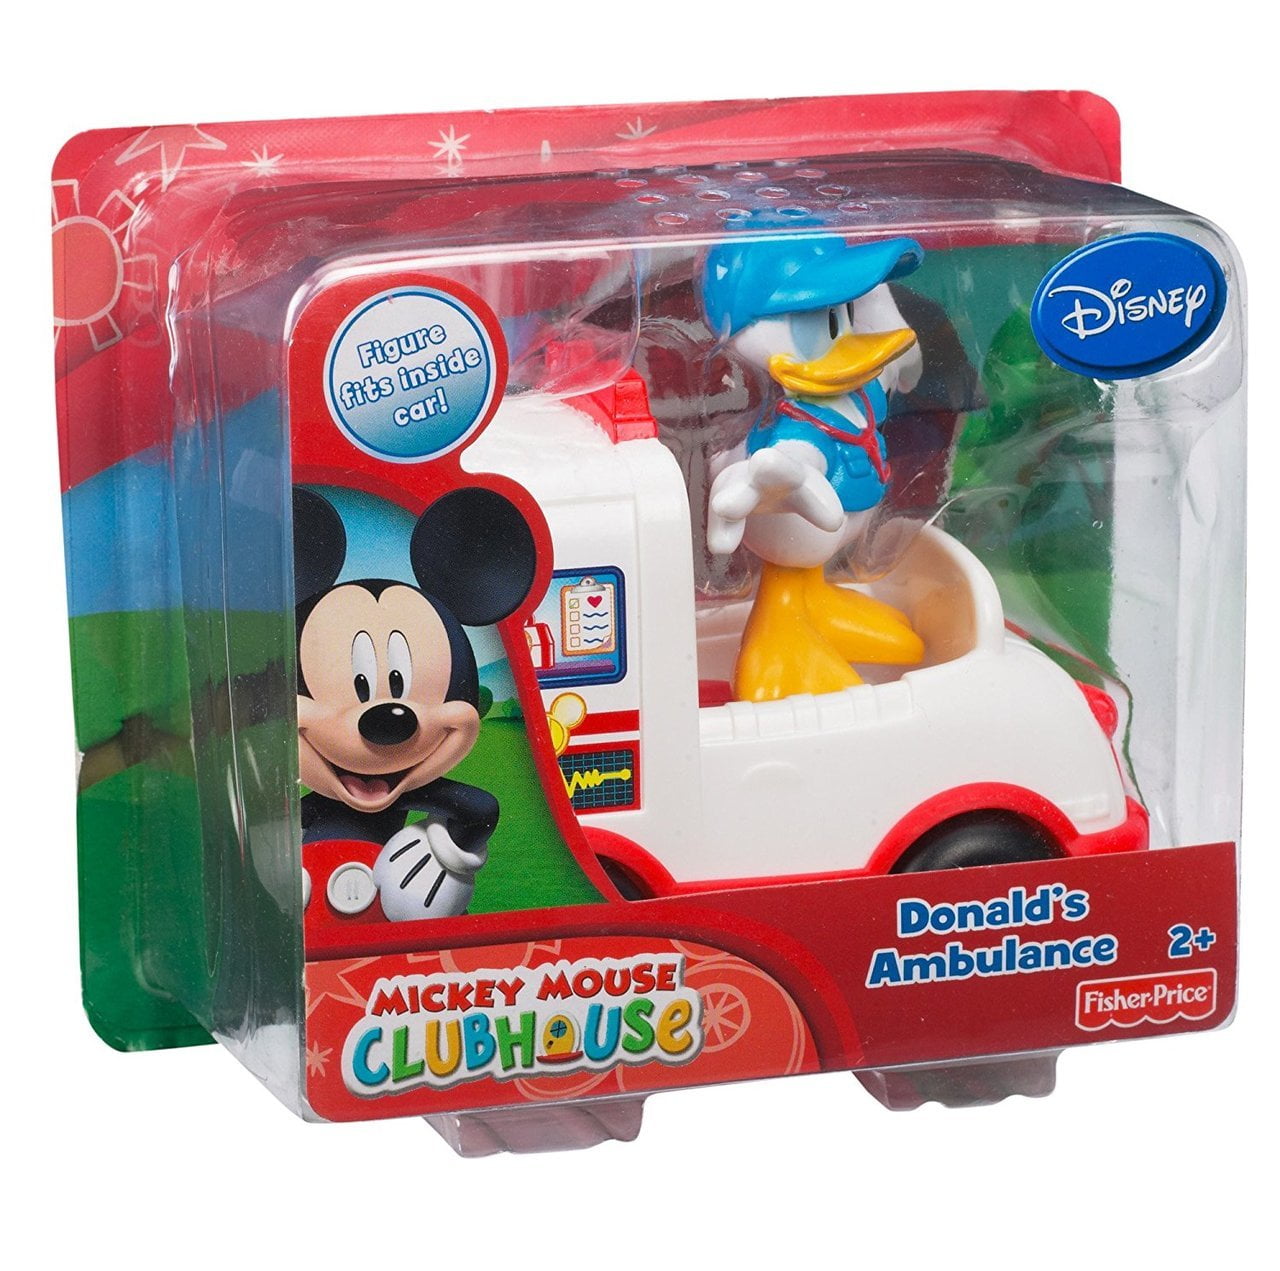 DISNEY MICKEY MOUSE CLUBHOUSE,DONALD DUCK'S AMBULANCE,FIGURE & VEHICLE,2+,NEW